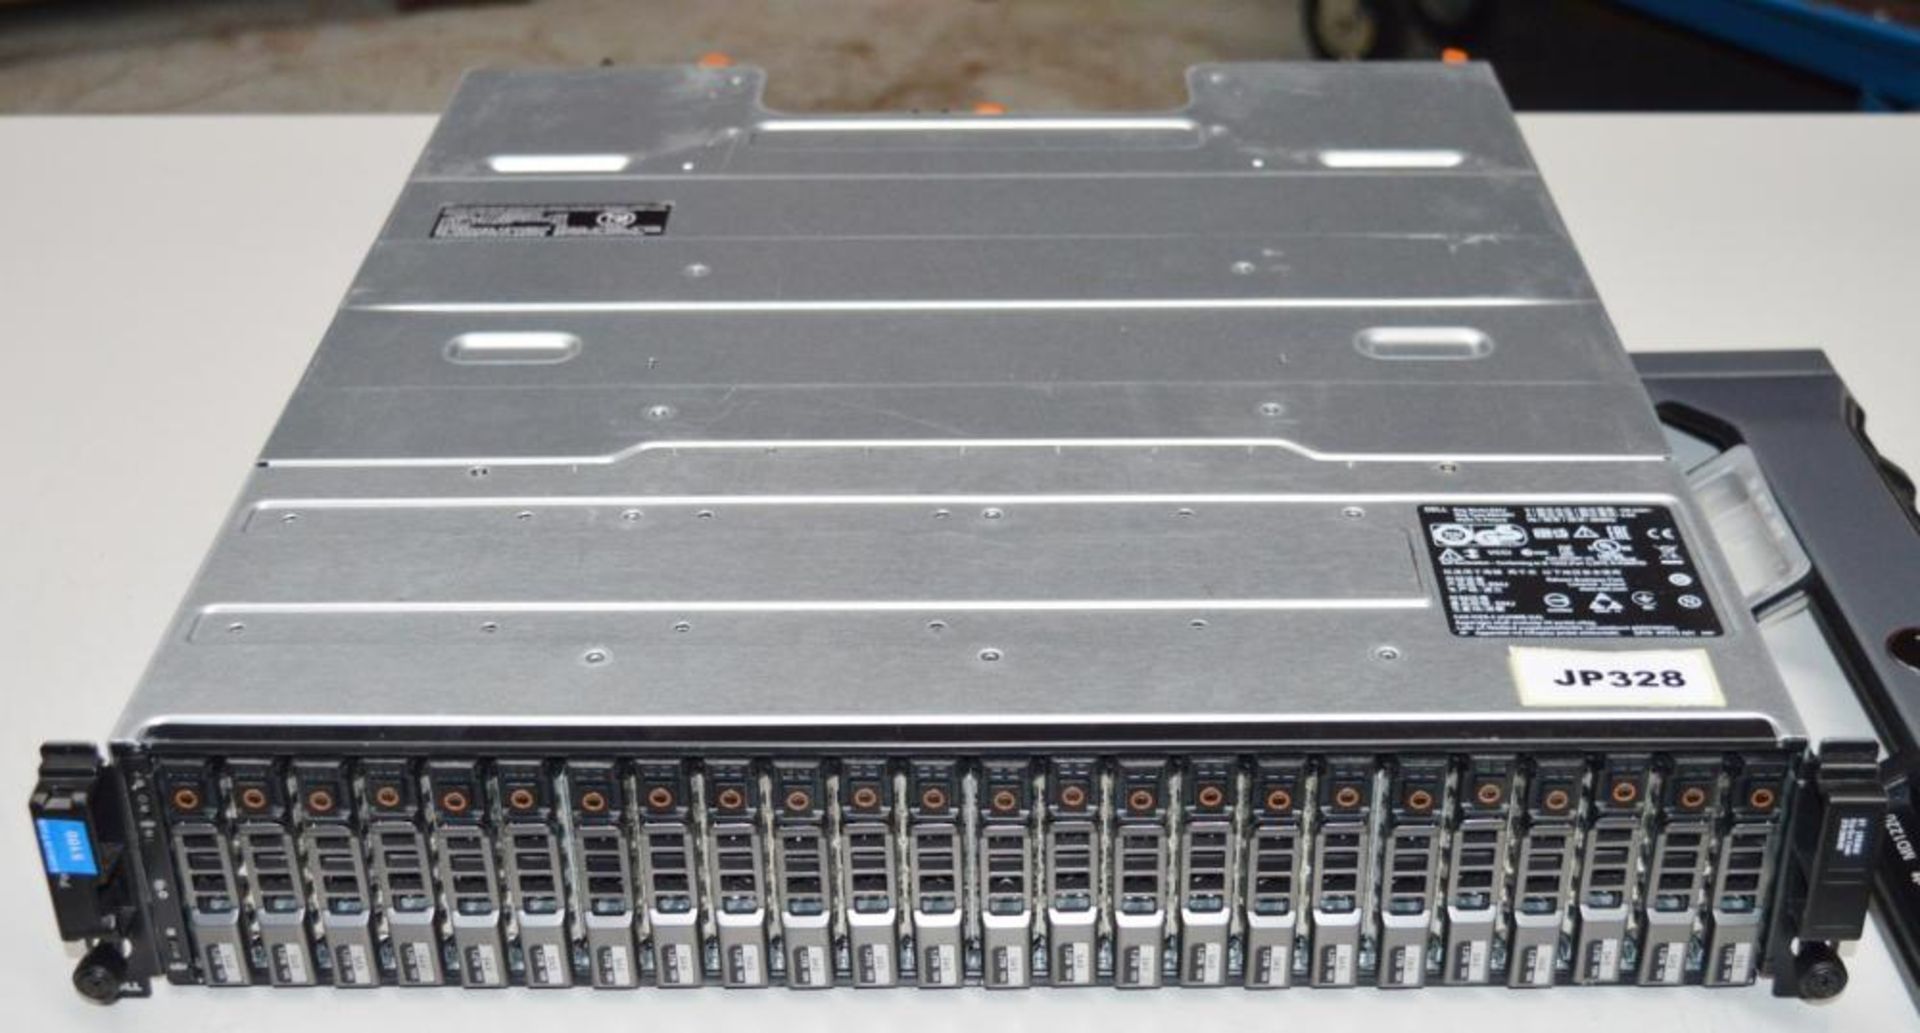 1 x Dell PowerVault MD1220 With Daul 600w PSU's and 2 x MD12 6Gb SAS Controllers - Bild 3 aus 8